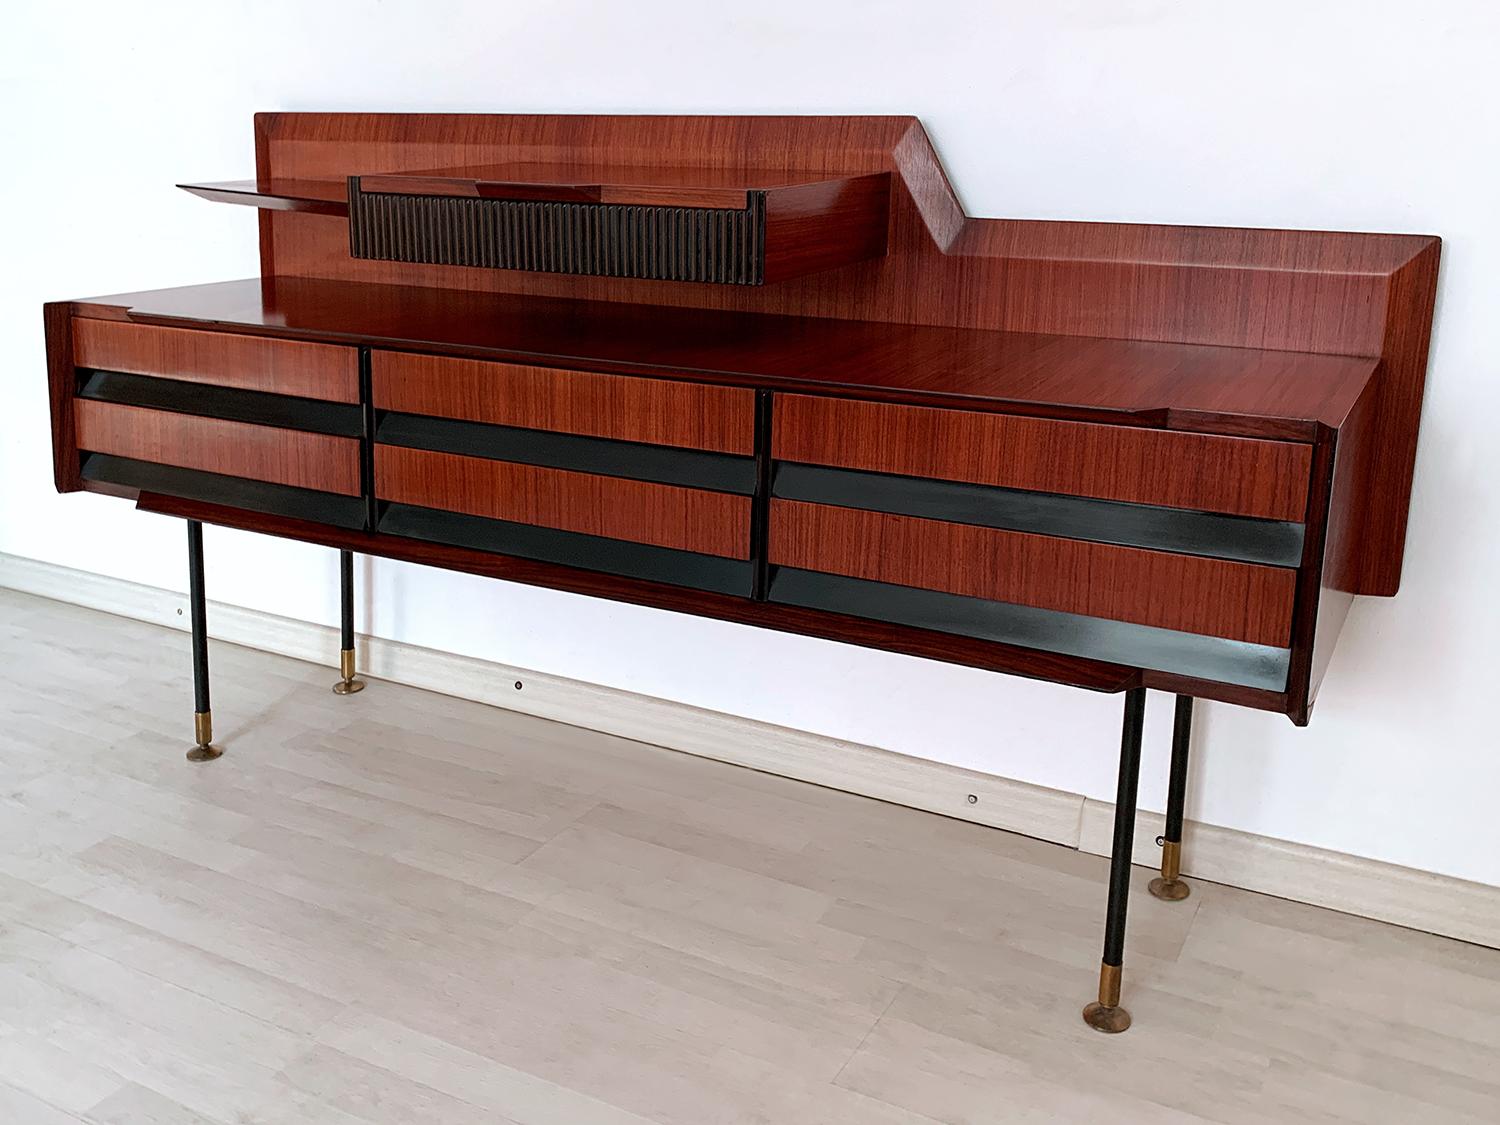 Stunning very rare Italian Sideboard and/or chest of drawers, very well designed by Vittorio Dassi in the 1950s.

All items designed and manufactured by Vittorio Dassi are always stylish and charming, and the uniqueness of this piece is given by its